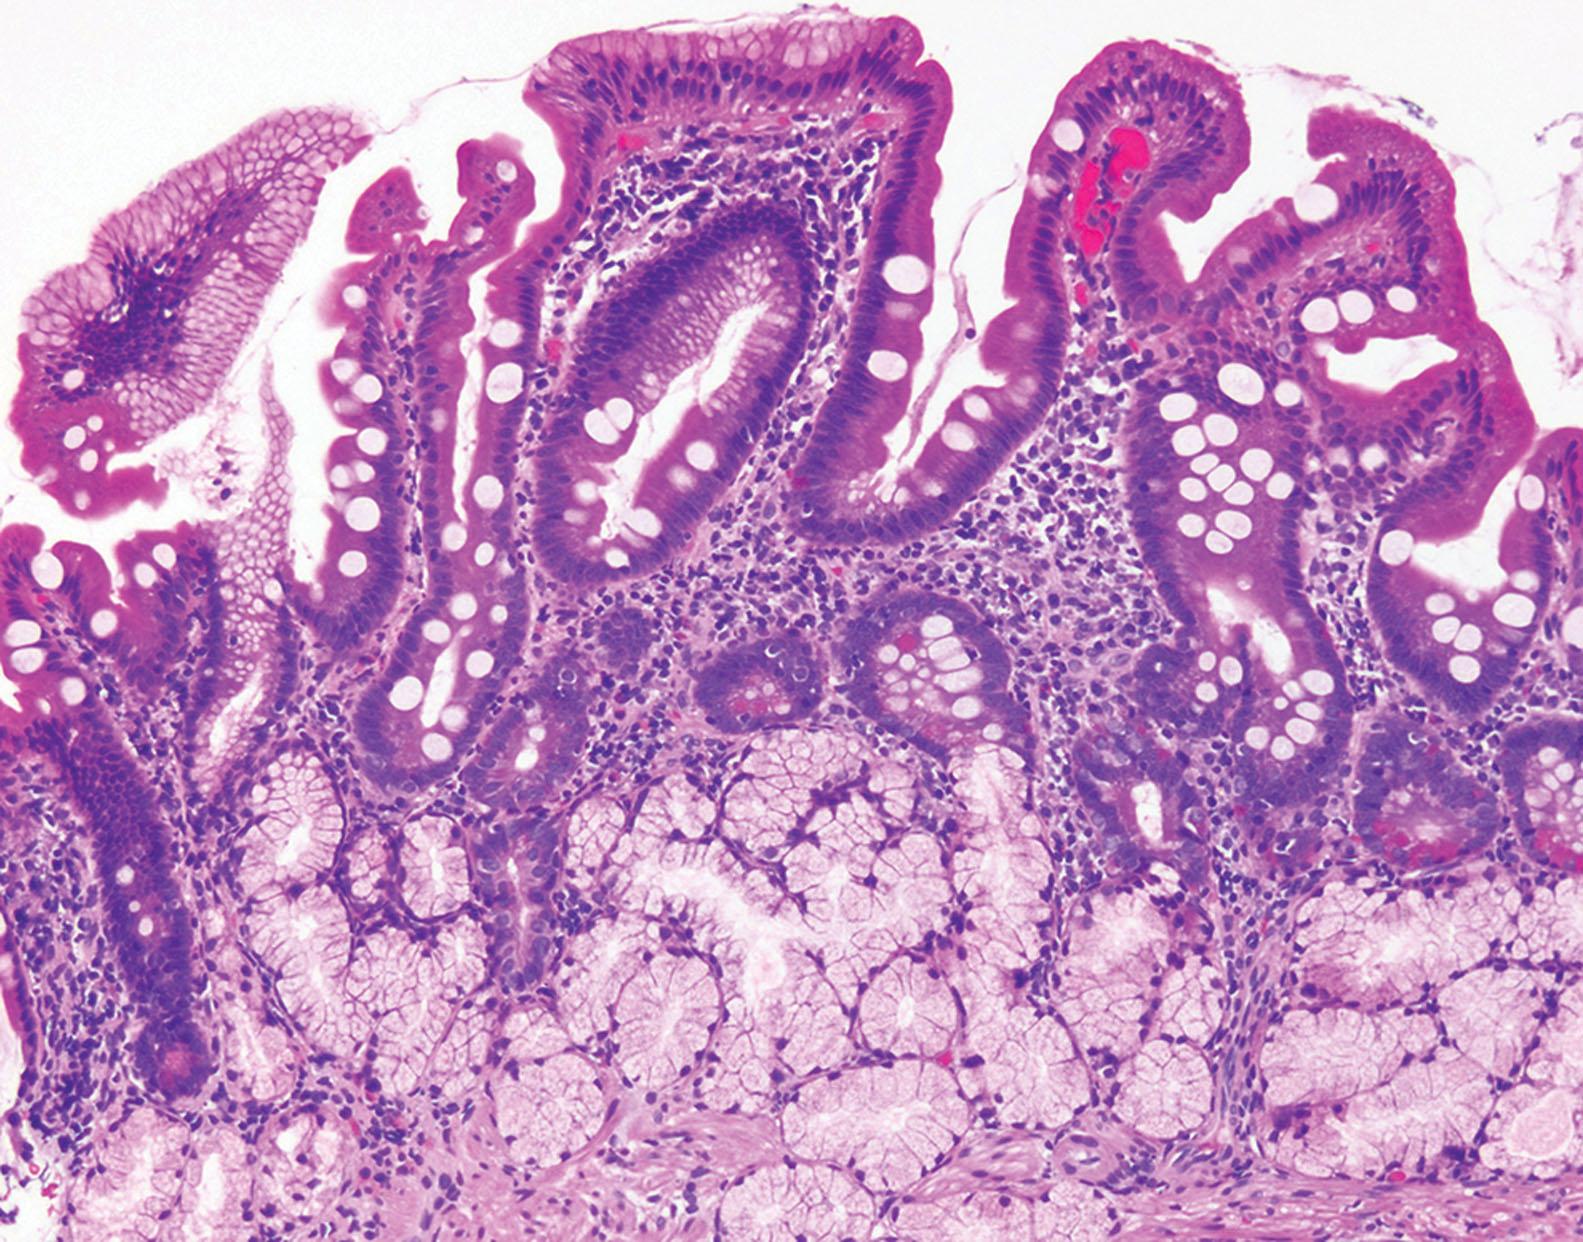 Figure 6.2, Peptic duodenitis: Prominent Brunner’s glands within the submucosa and lamina propria associated with foveolar-type metaplasia on the villous surface of the duodenum and partial villous shortening are characteristic. In contrast to the absorptive cells of the small intestine, foveolar metaplastic cells have small apical mucin vacuoles (top left).